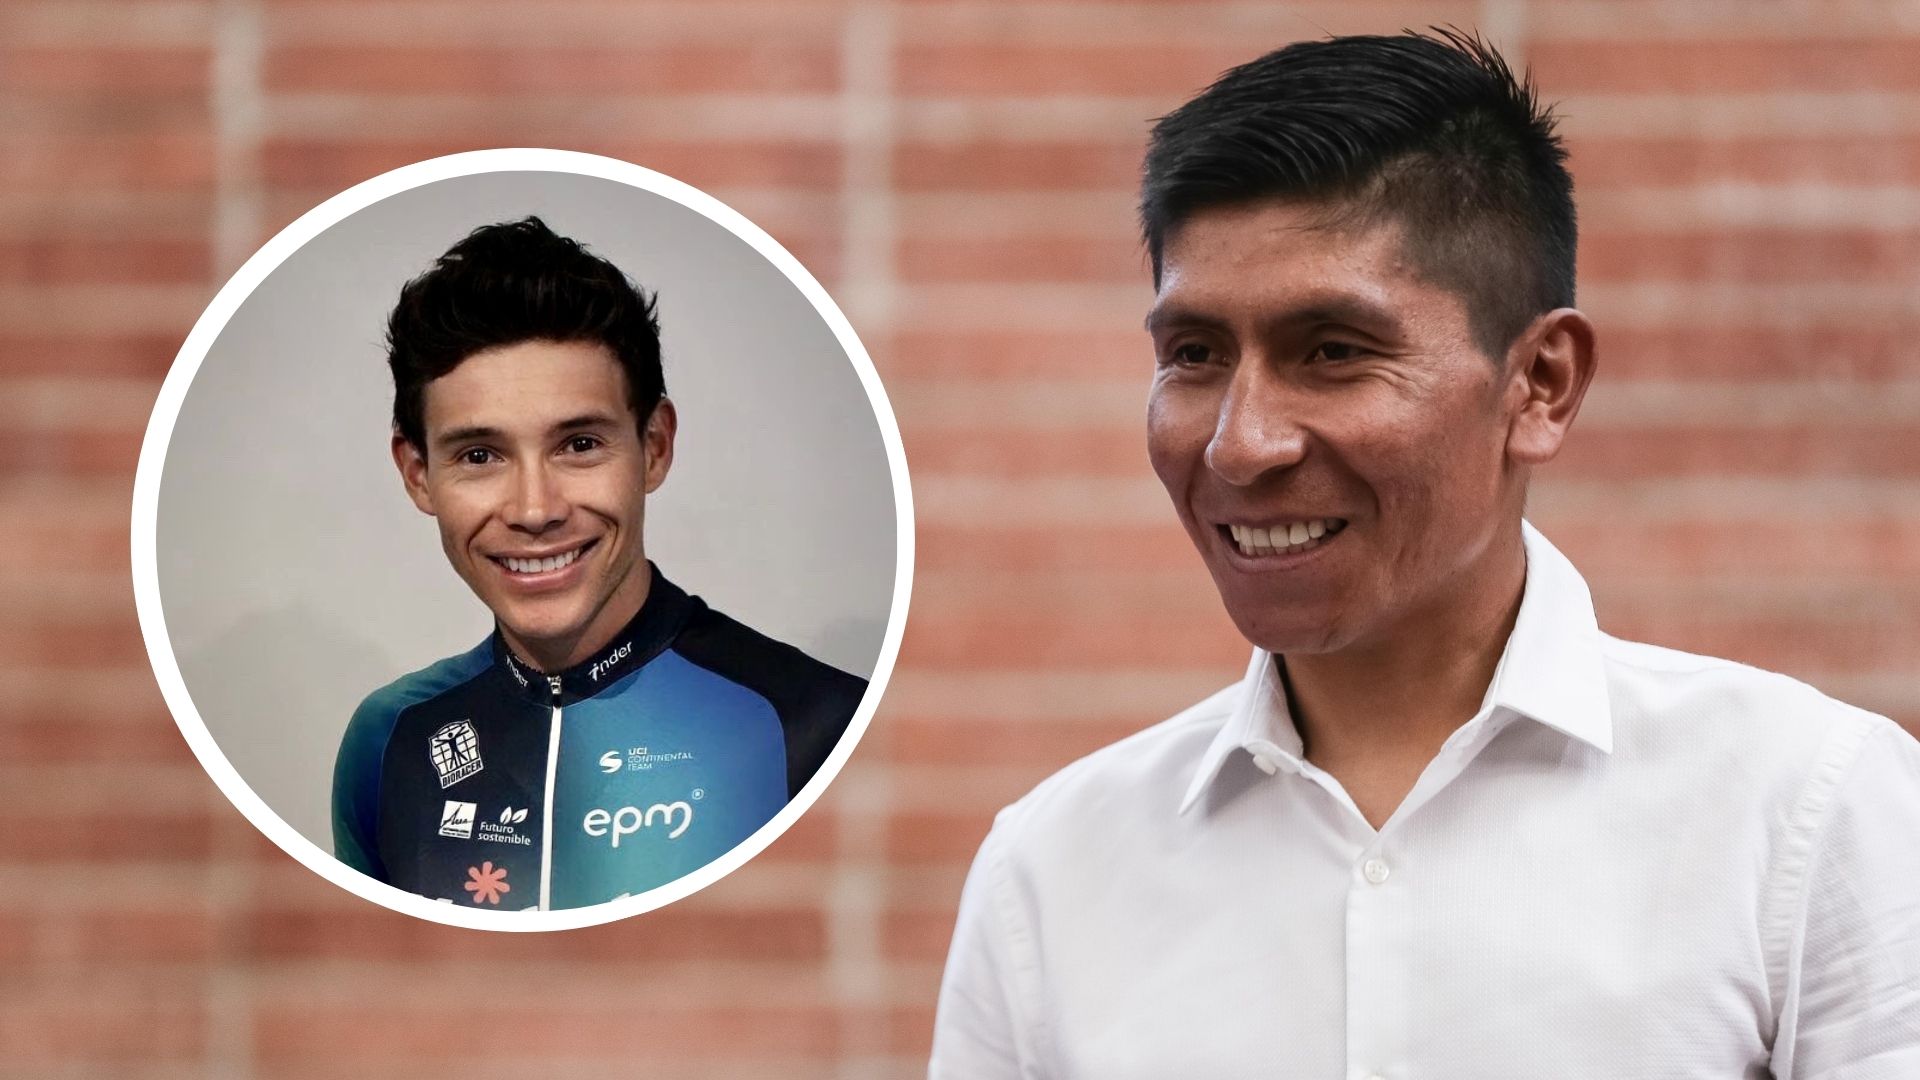 The Team Medellín rider highlighted the decision of the Cómbita rider and stated that the two have been victims of injustice.  Team Medellin - Colprensa